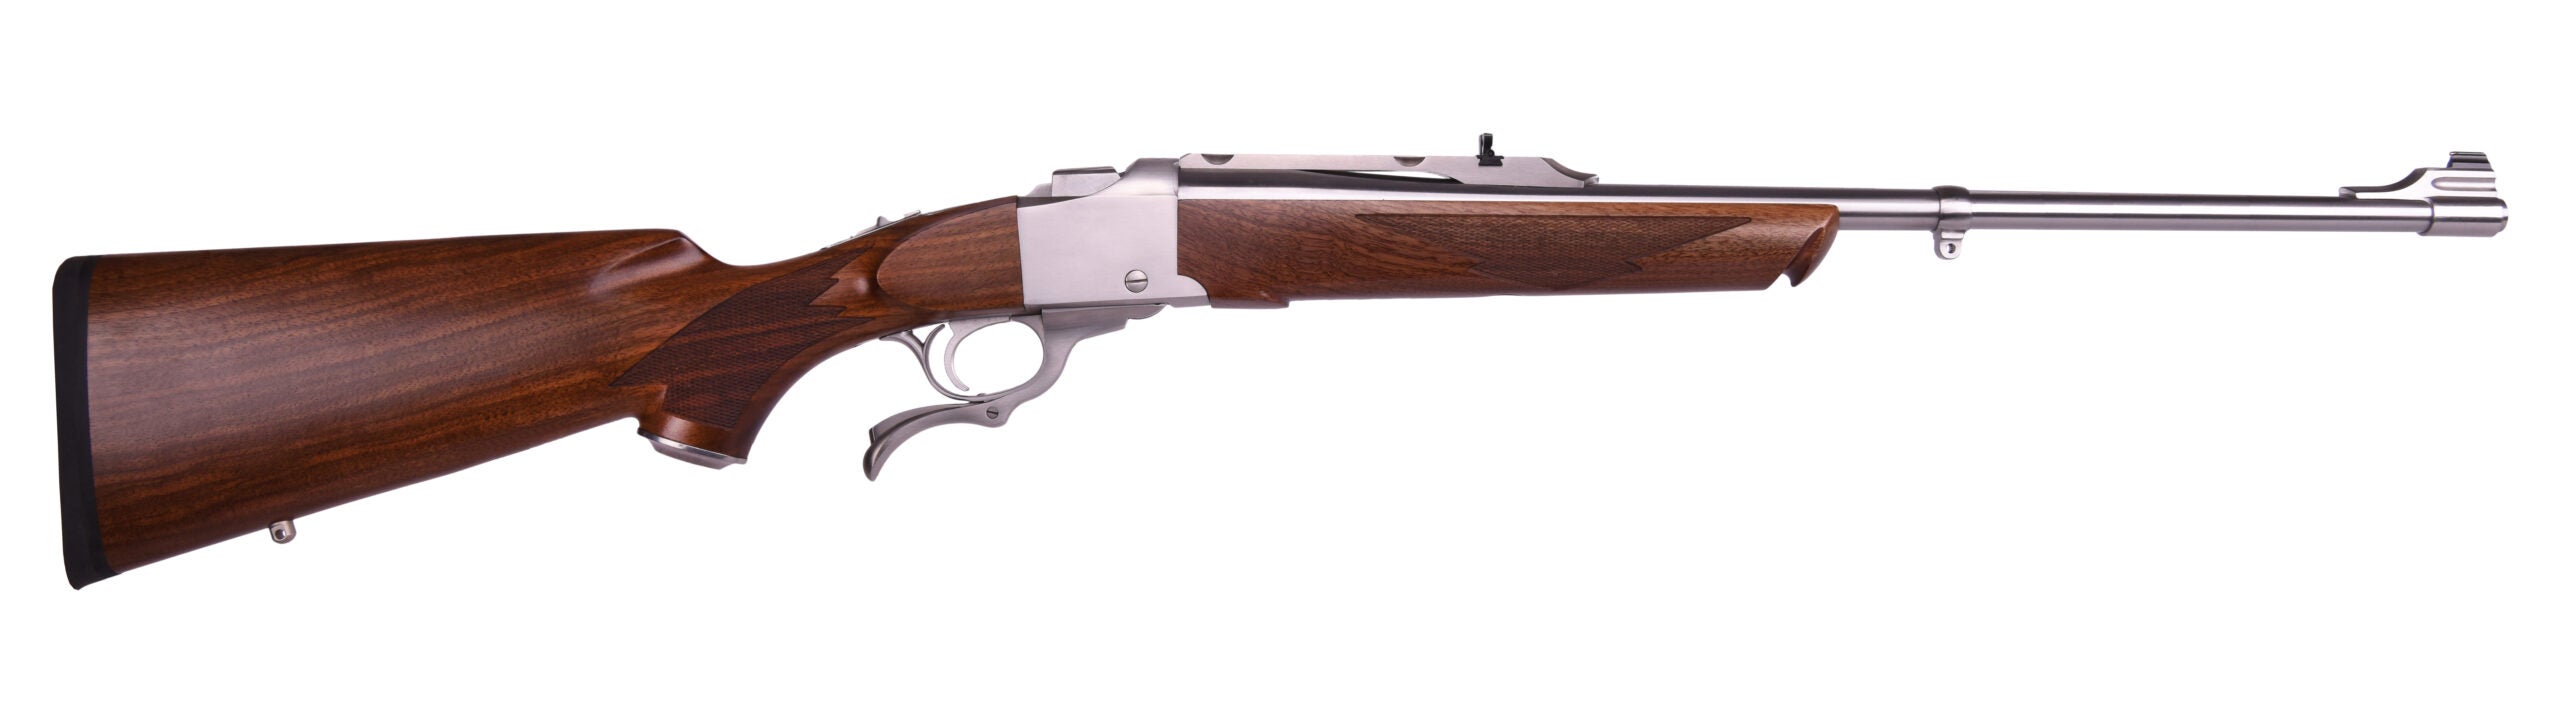 photo of Ruger No. 1 rifle